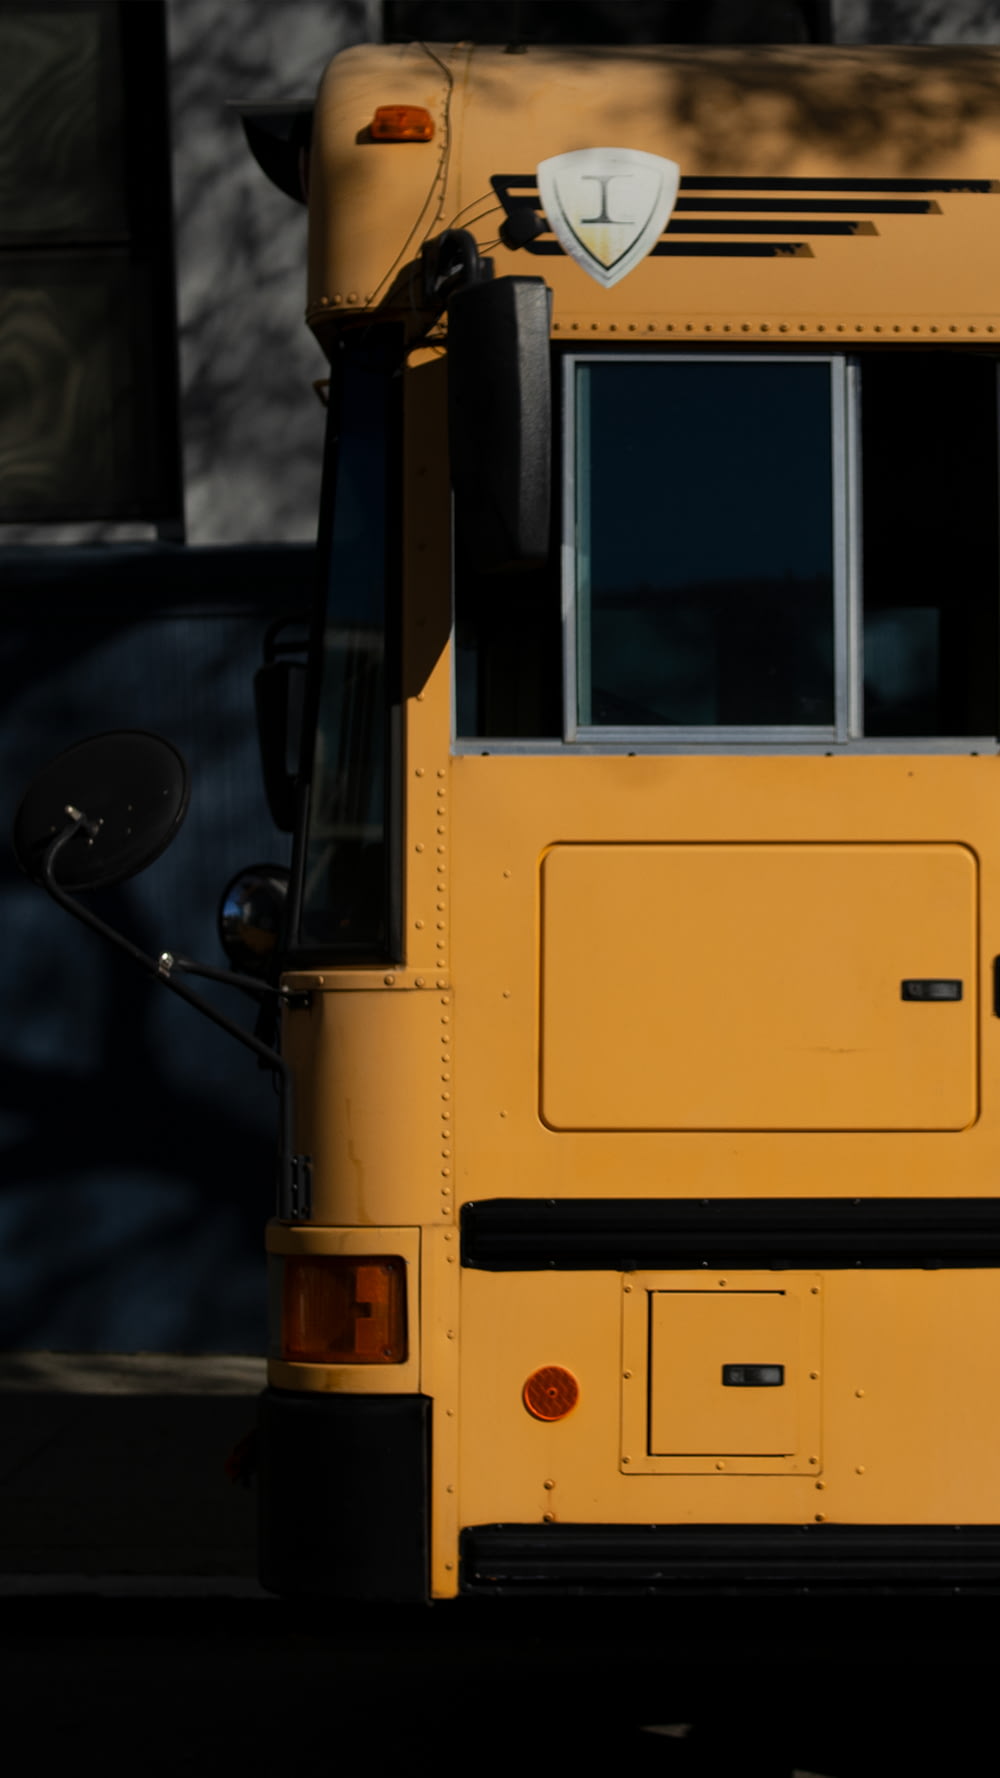 yellow bus in close up photography